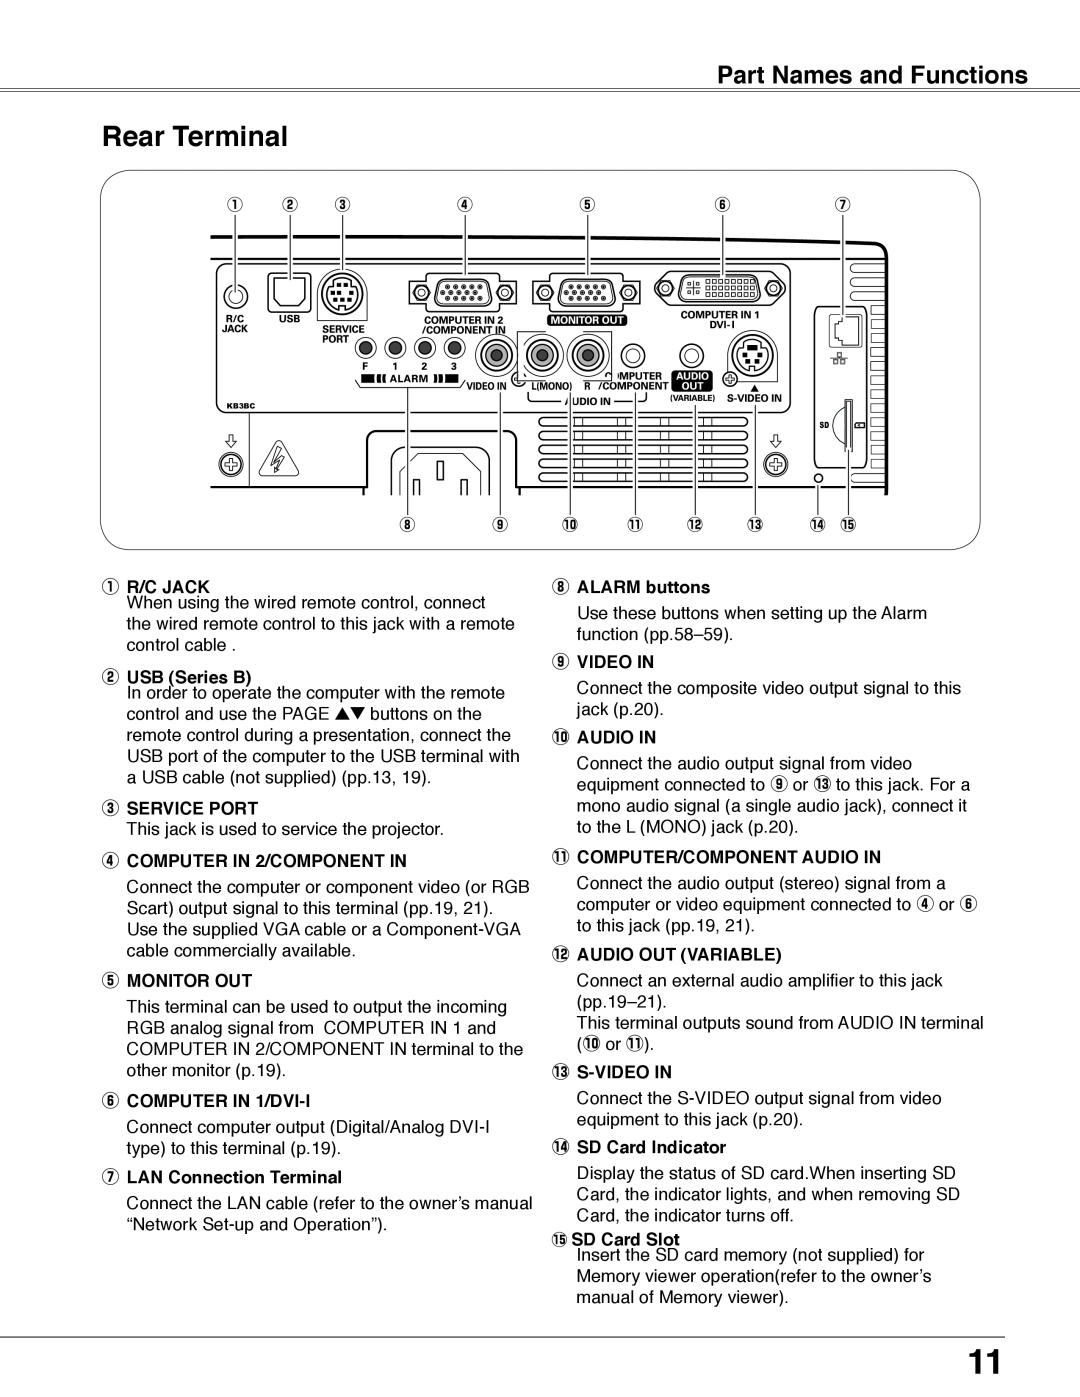 Eiki LC-WB40N owner manual Rear Terminal, Part Names and Functions 